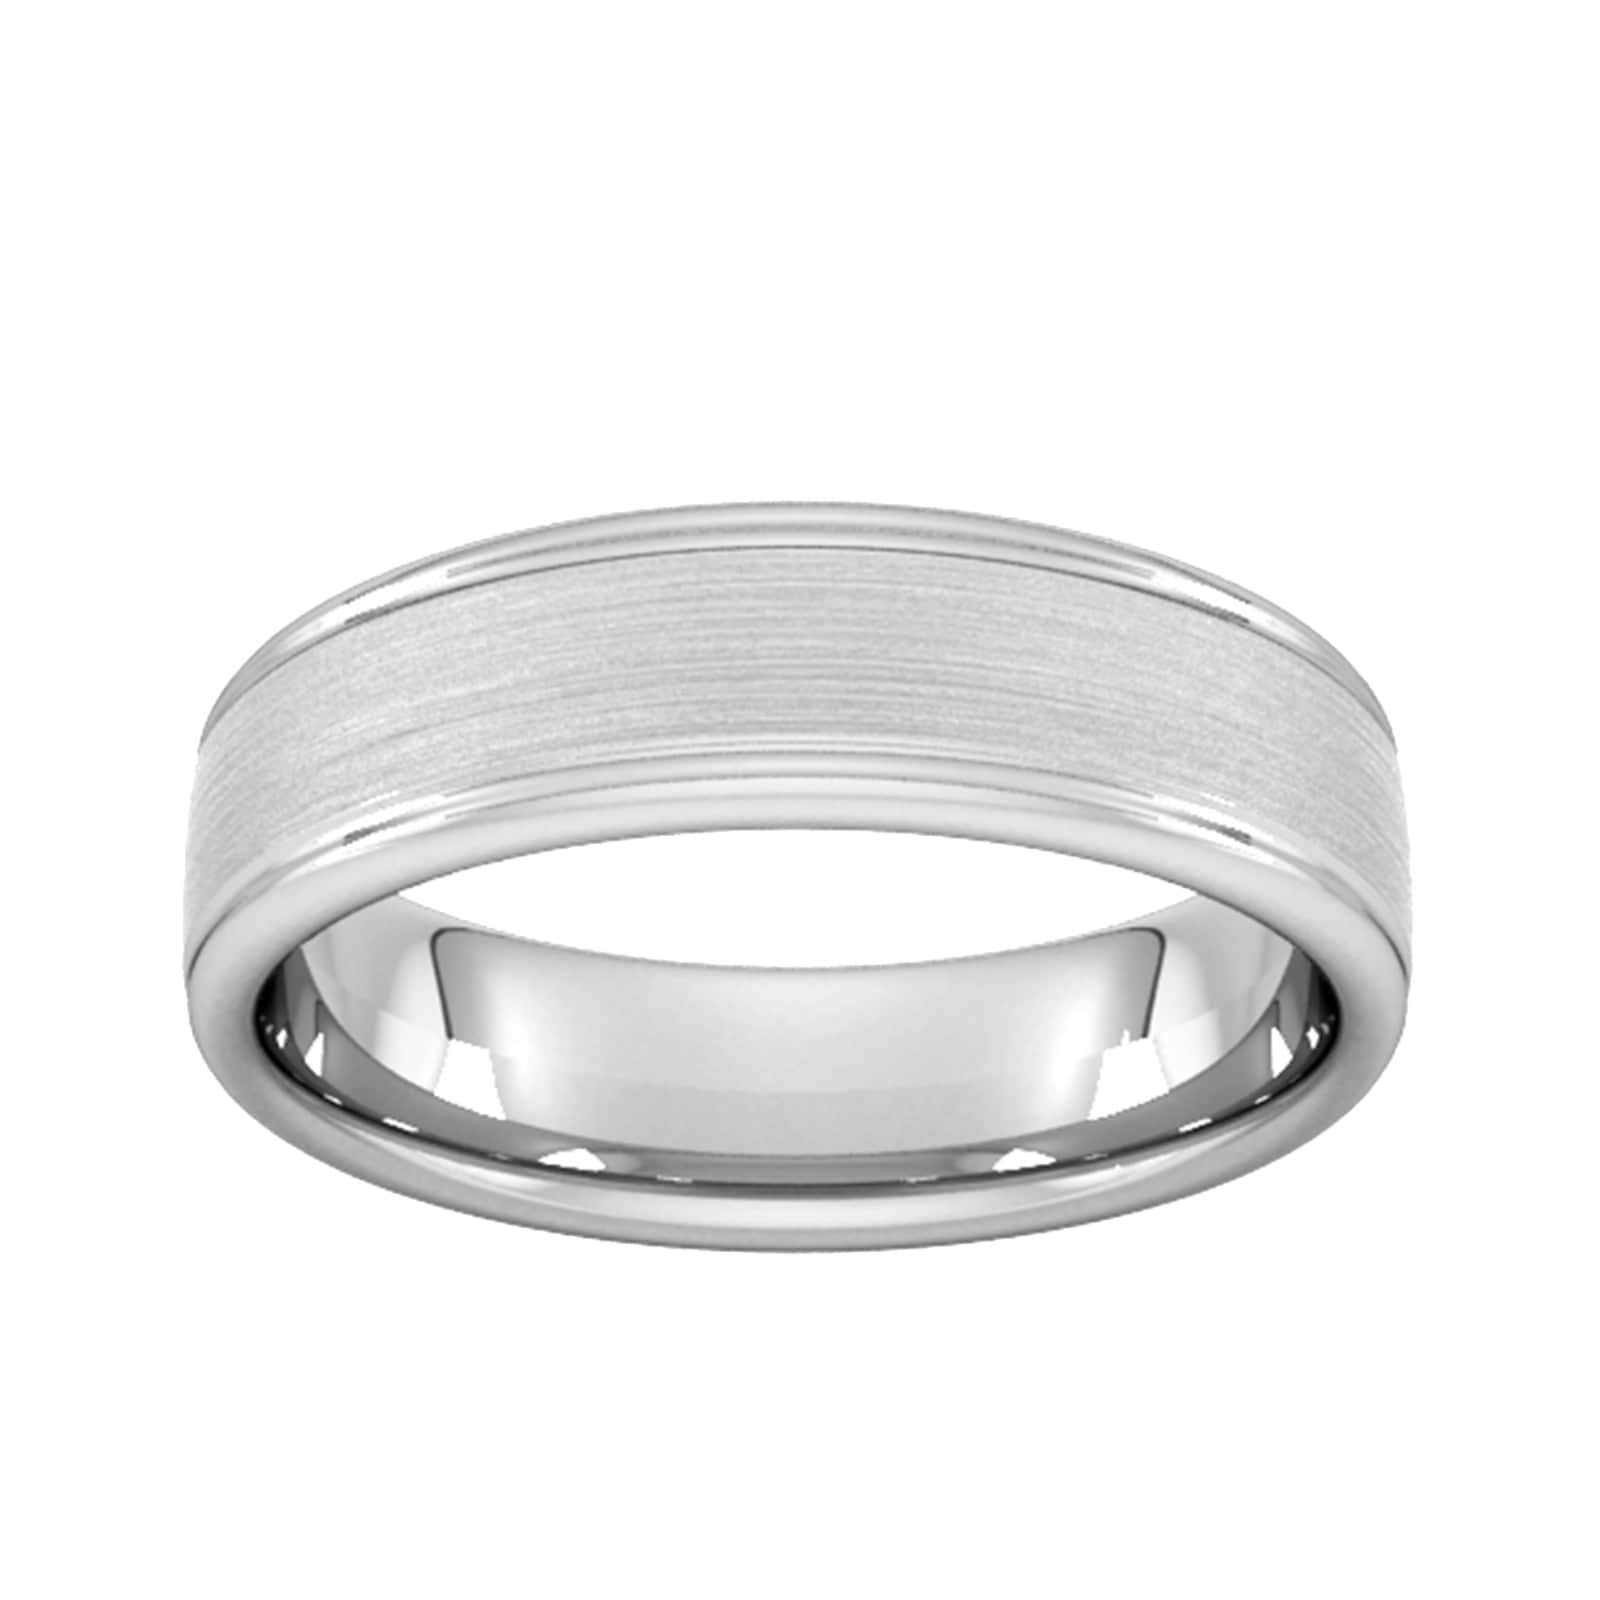 6mm D Shape Standard Matt Centre With Grooves Wedding Ring In Platinum - Ring Size M